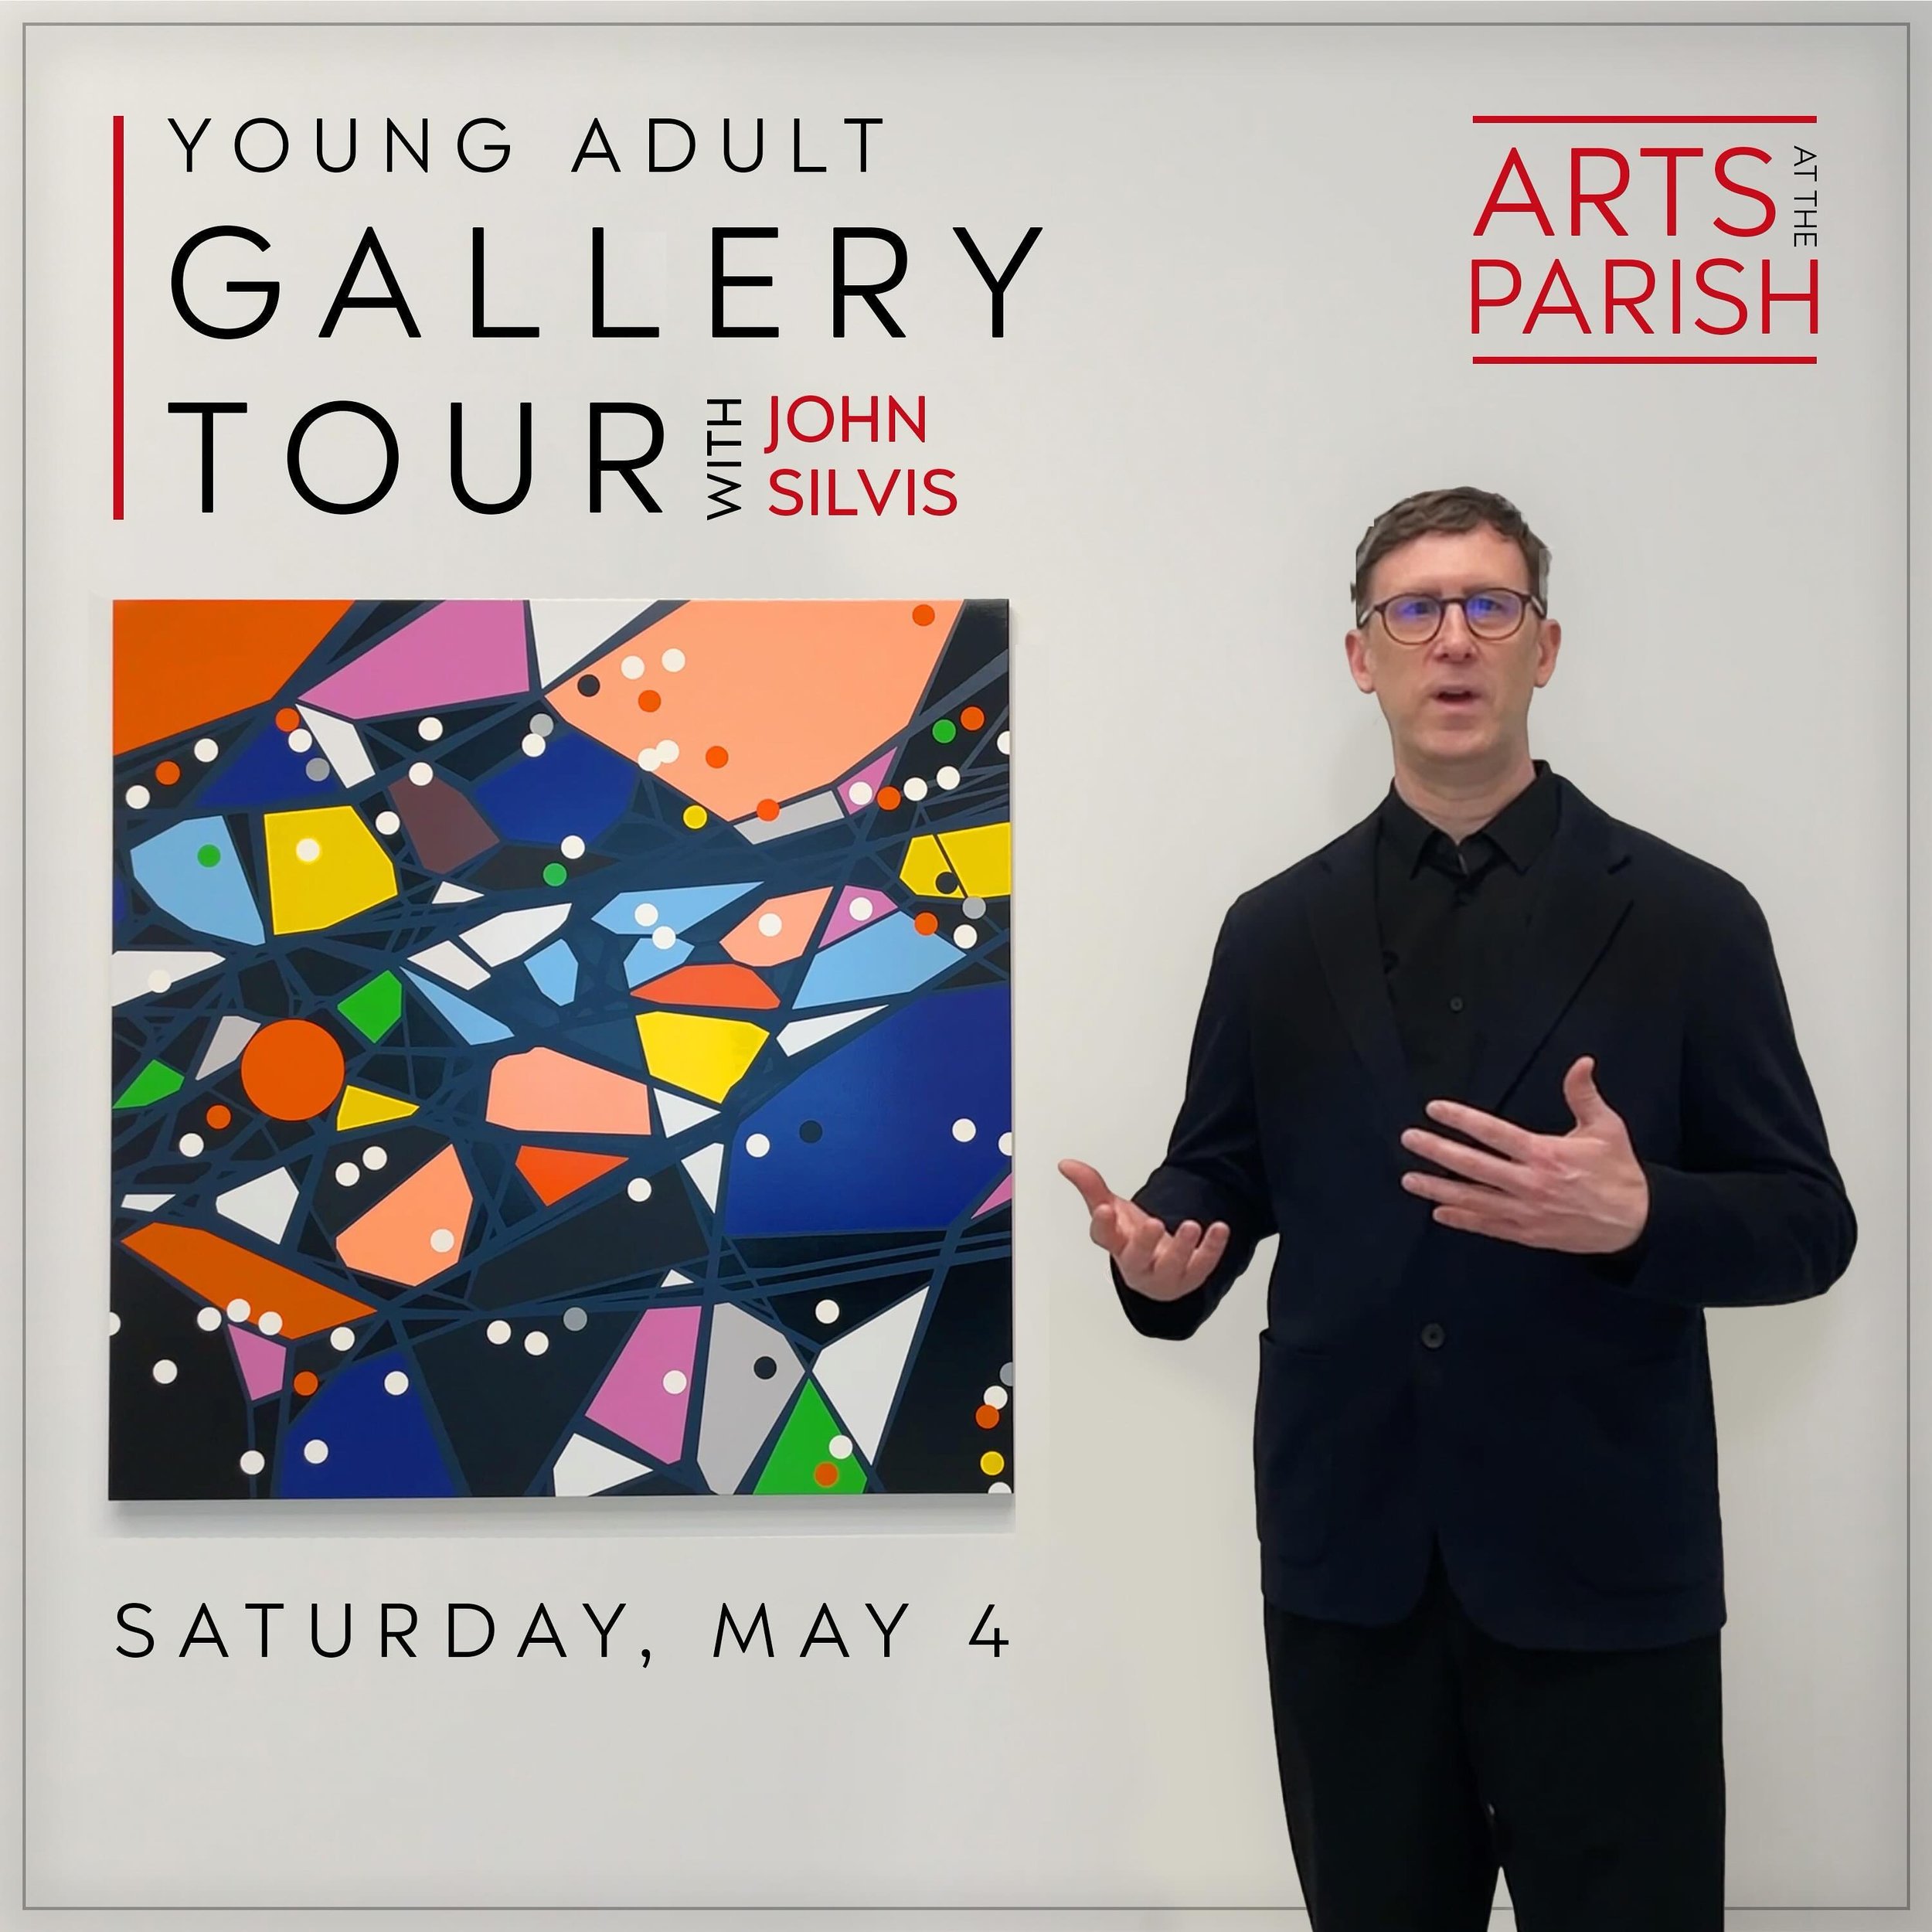 As part of our newly-launched Arts at the Parish program, on Saturday May 4 international art curator John Silvis will lead a walking tour for our community of young adults (20&rsquo;s &amp; 30&rsquo;s) through various galleries in TriBeCa, followed 